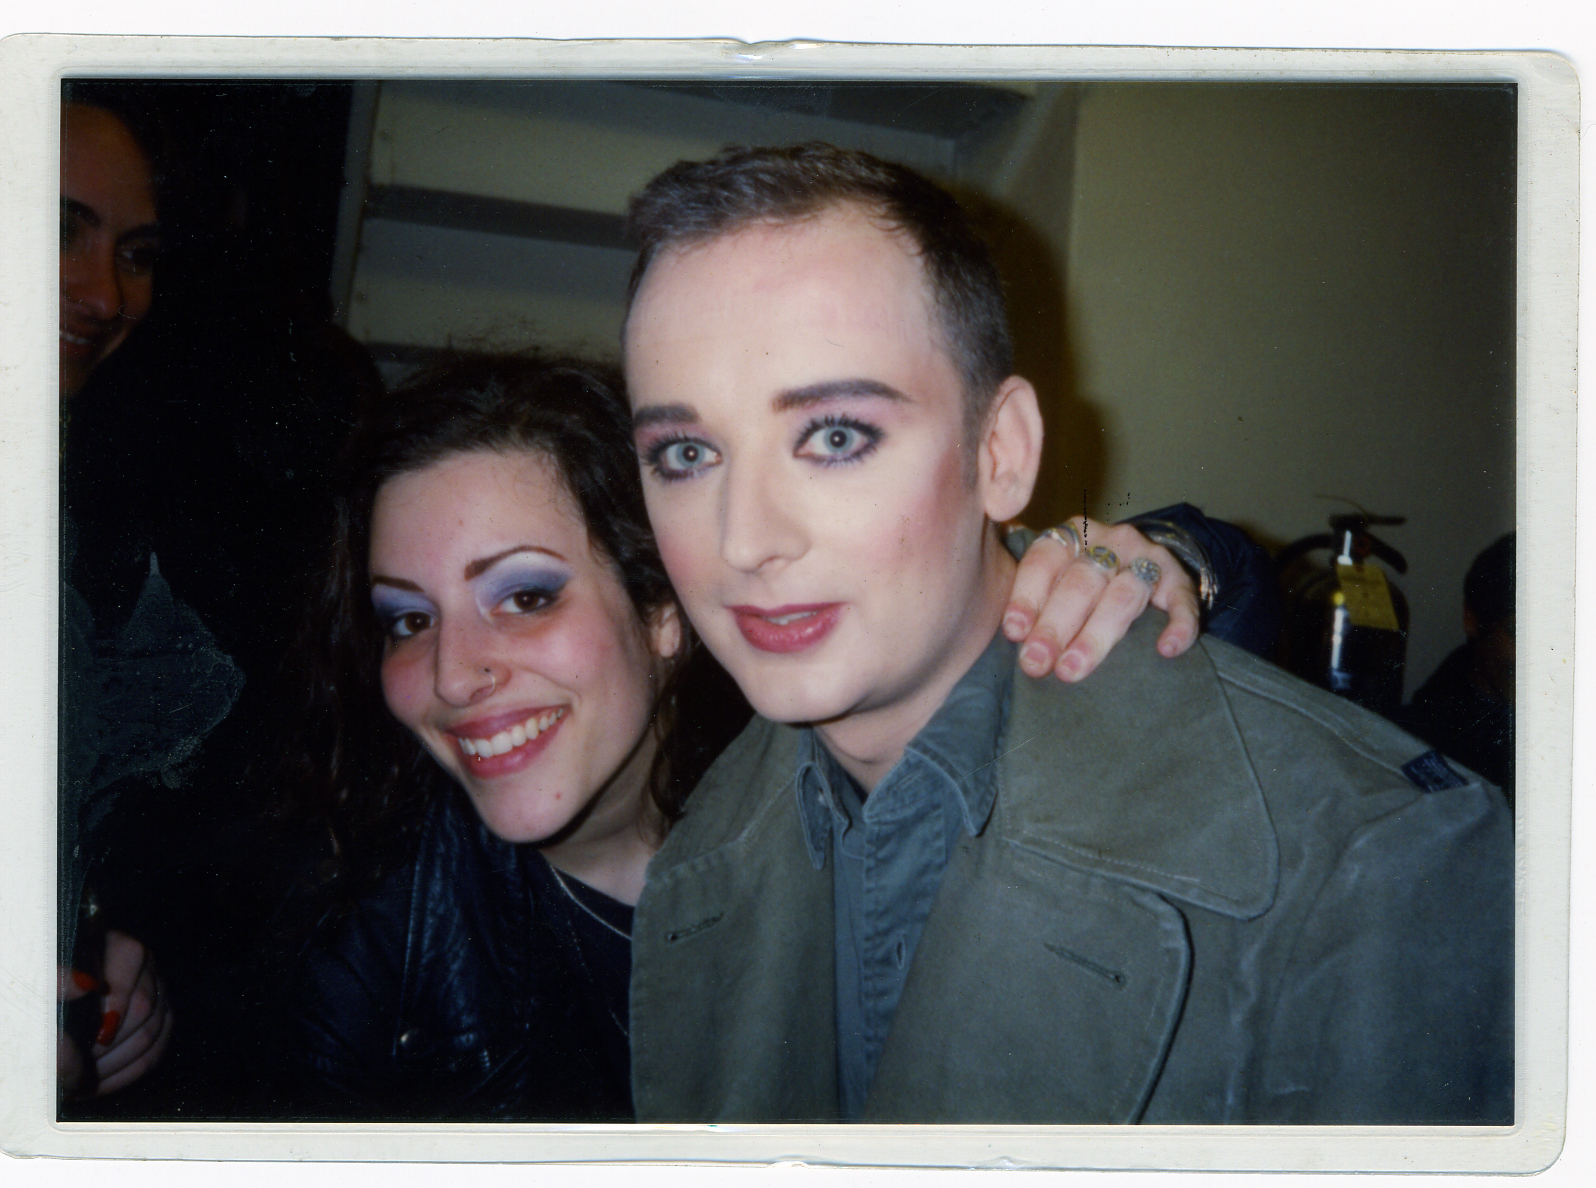 SKY Palkowitz with Boy George backstage at The Beacon Theatre, 1992